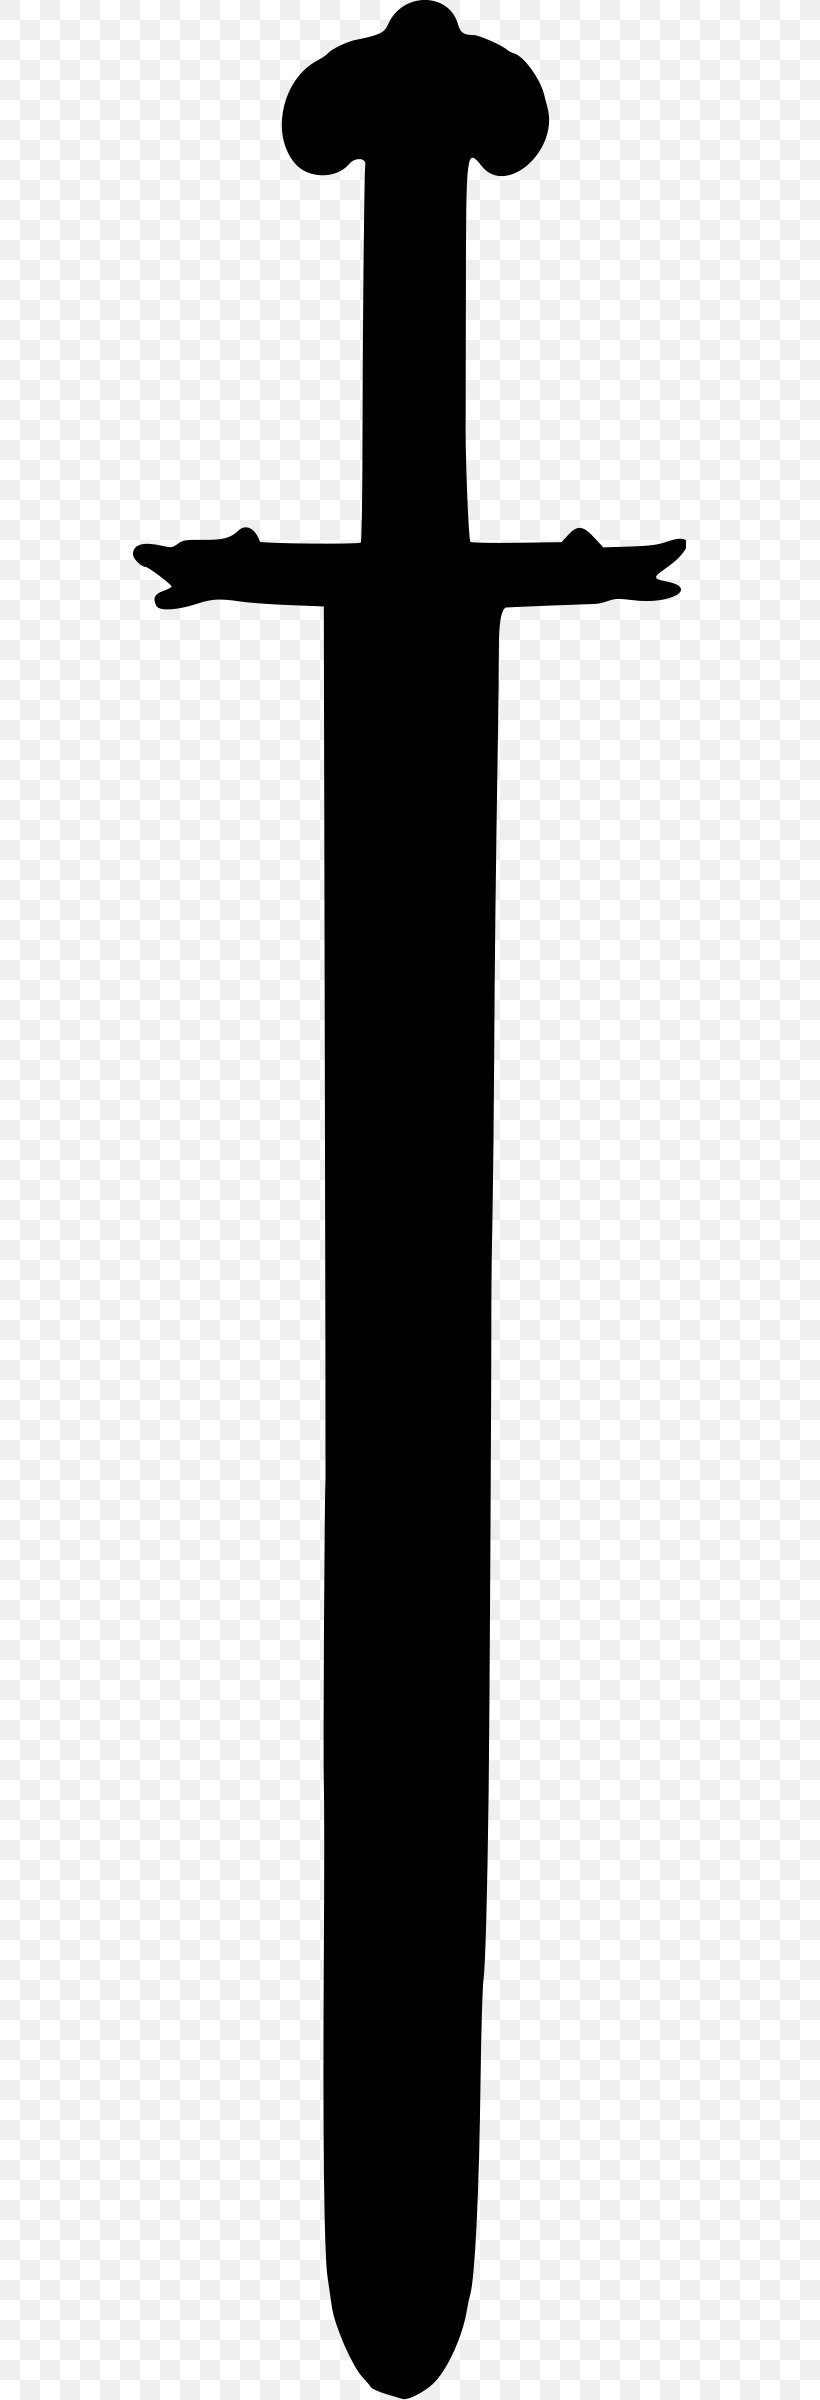 Silhouette Classification Of Swords Viking Sword Png 553x2400px Silhouette Black Black And White Classification Of Swords